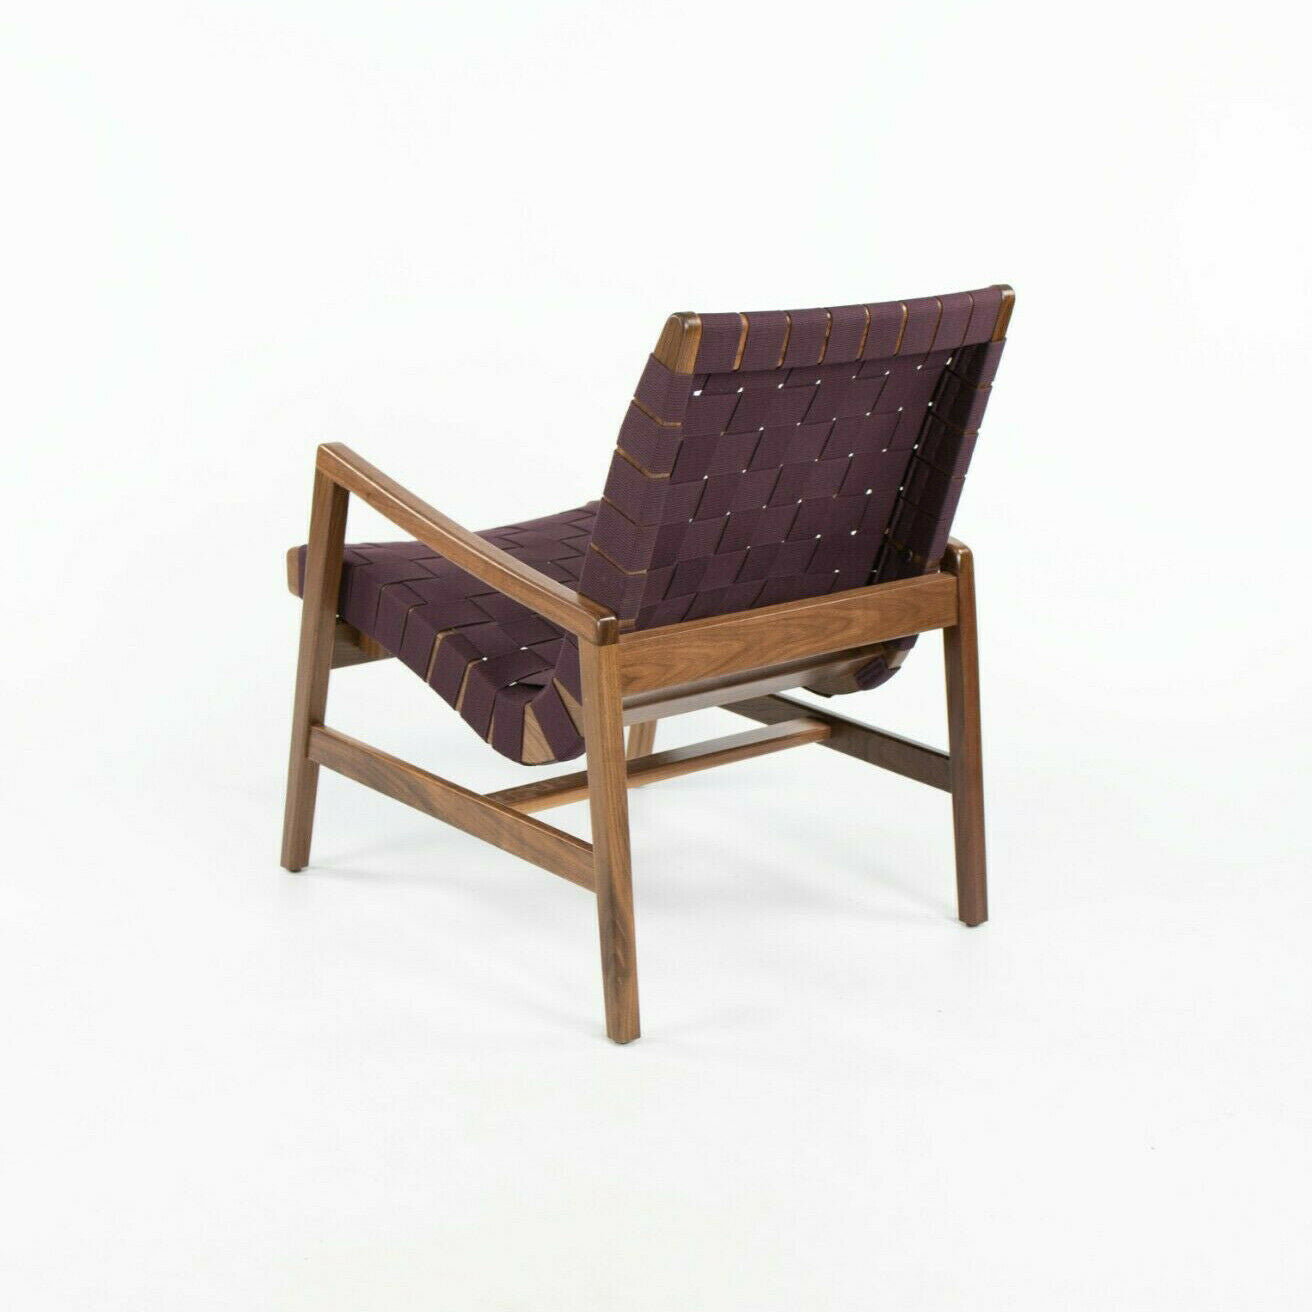 SOLD 2021 Jens Risom for Knoll Lounge Chair with Arms Light in Walnut with Aubergine Cotton